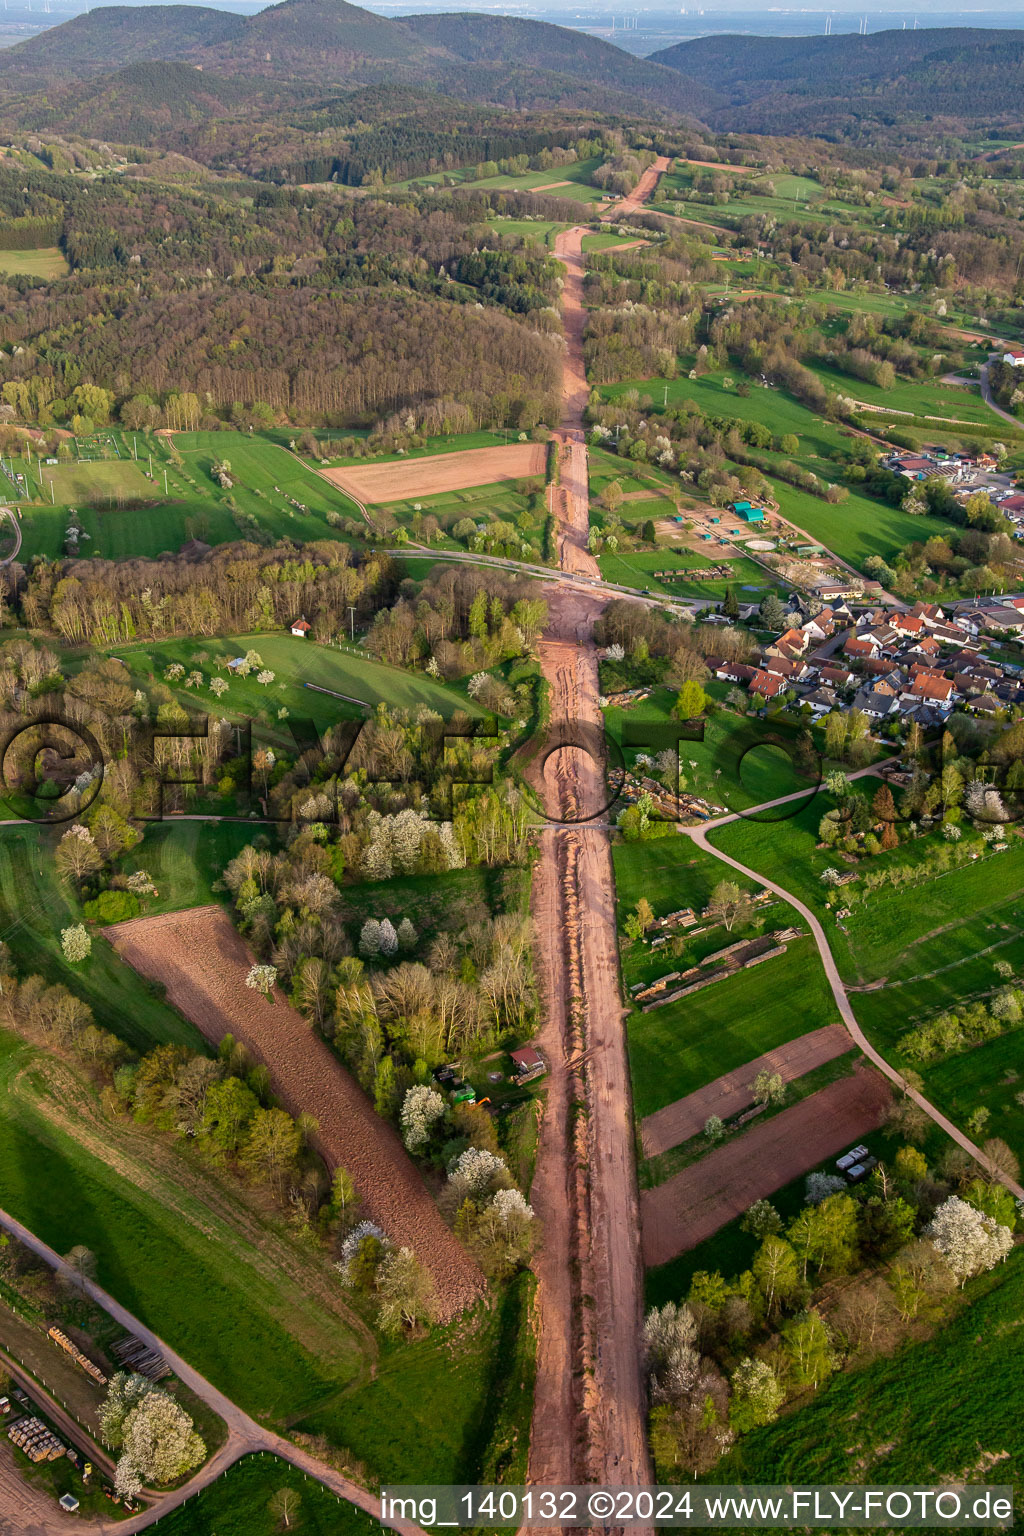 Aerial photograpy of Path through the Palatinate Forest to rebuild the 51 km section of the Trans-Europe Natural Gas Pipeline (TENP-III from the Netherlands to Switzerland) between Mittelbrunn and Klingenmünster in the district Gossersweiler in Gossersweiler-Stein in the state Rhineland-Palatinate, Germany